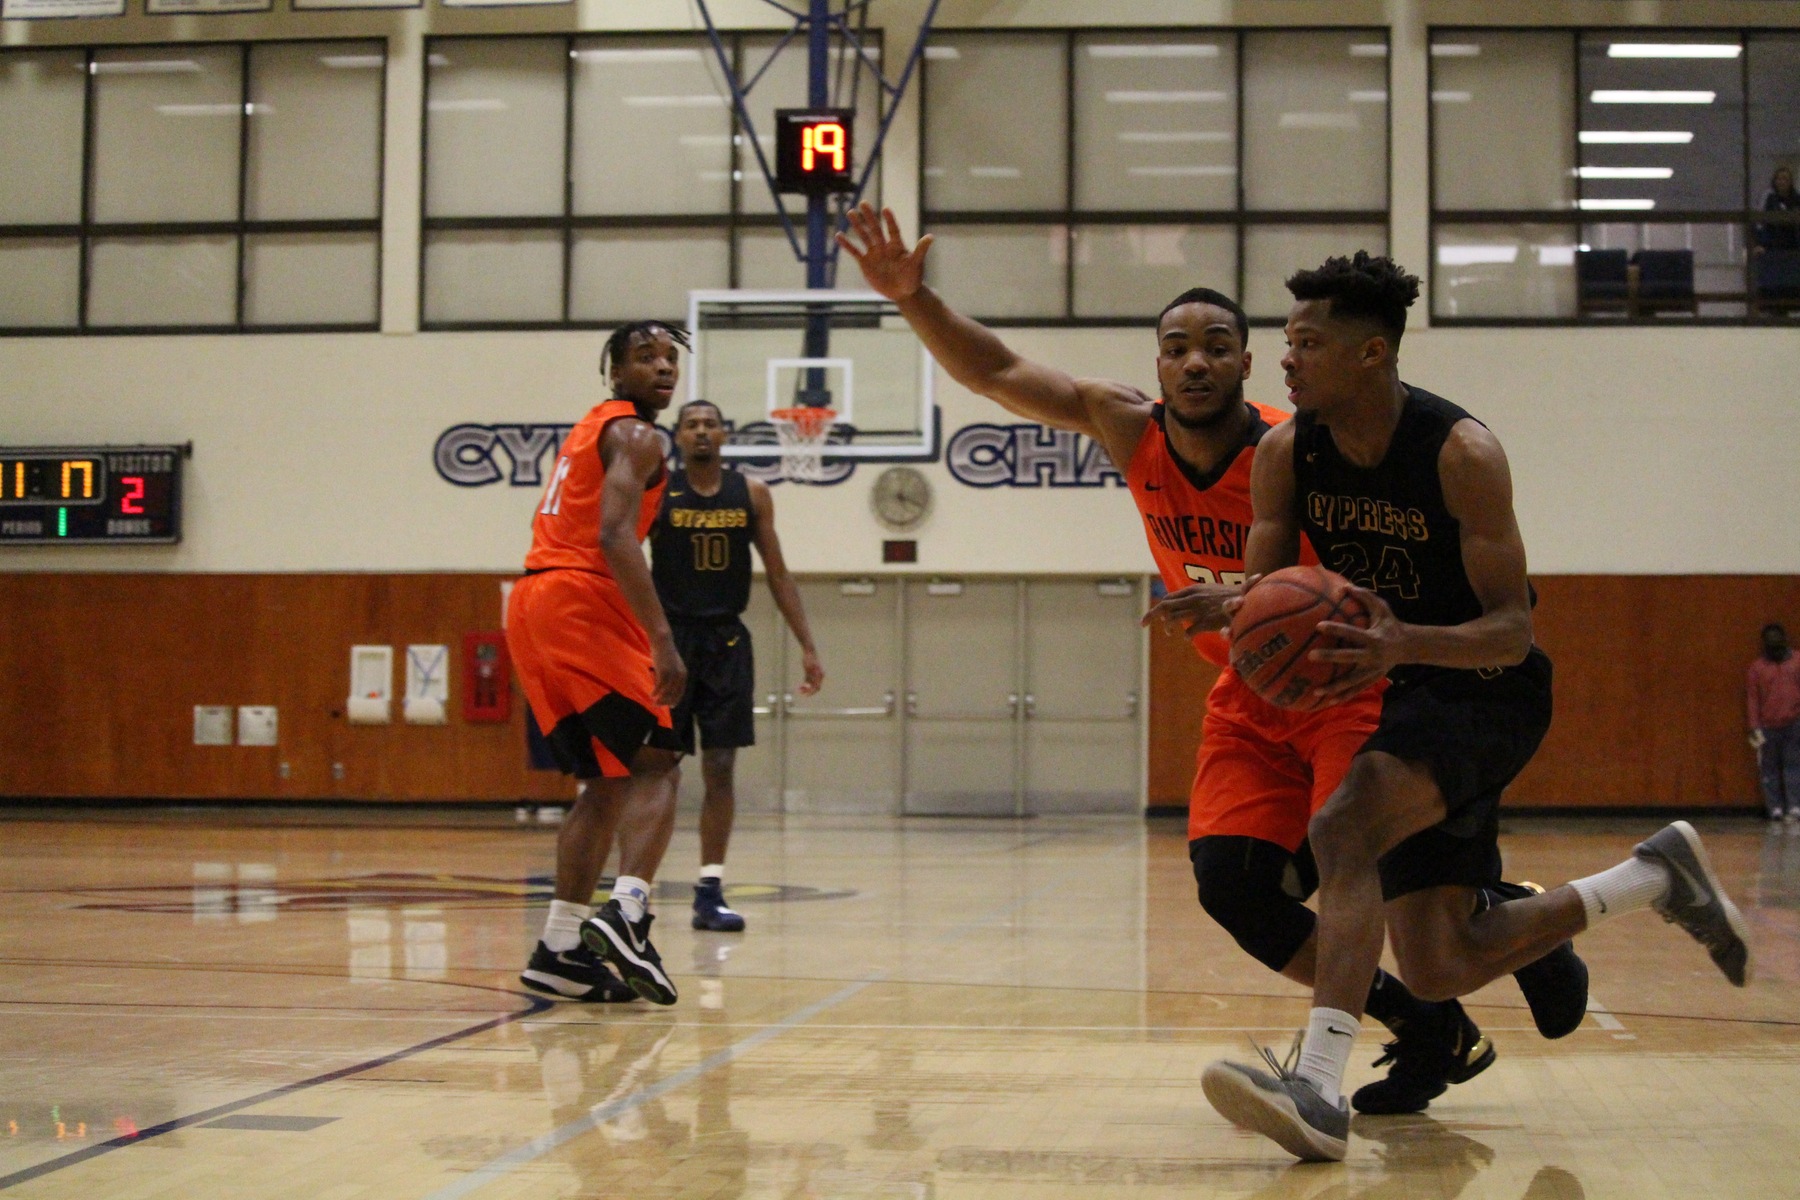 Chargers Close Out Santa Ana at Home, 81-68; Playoff Hopes Alive